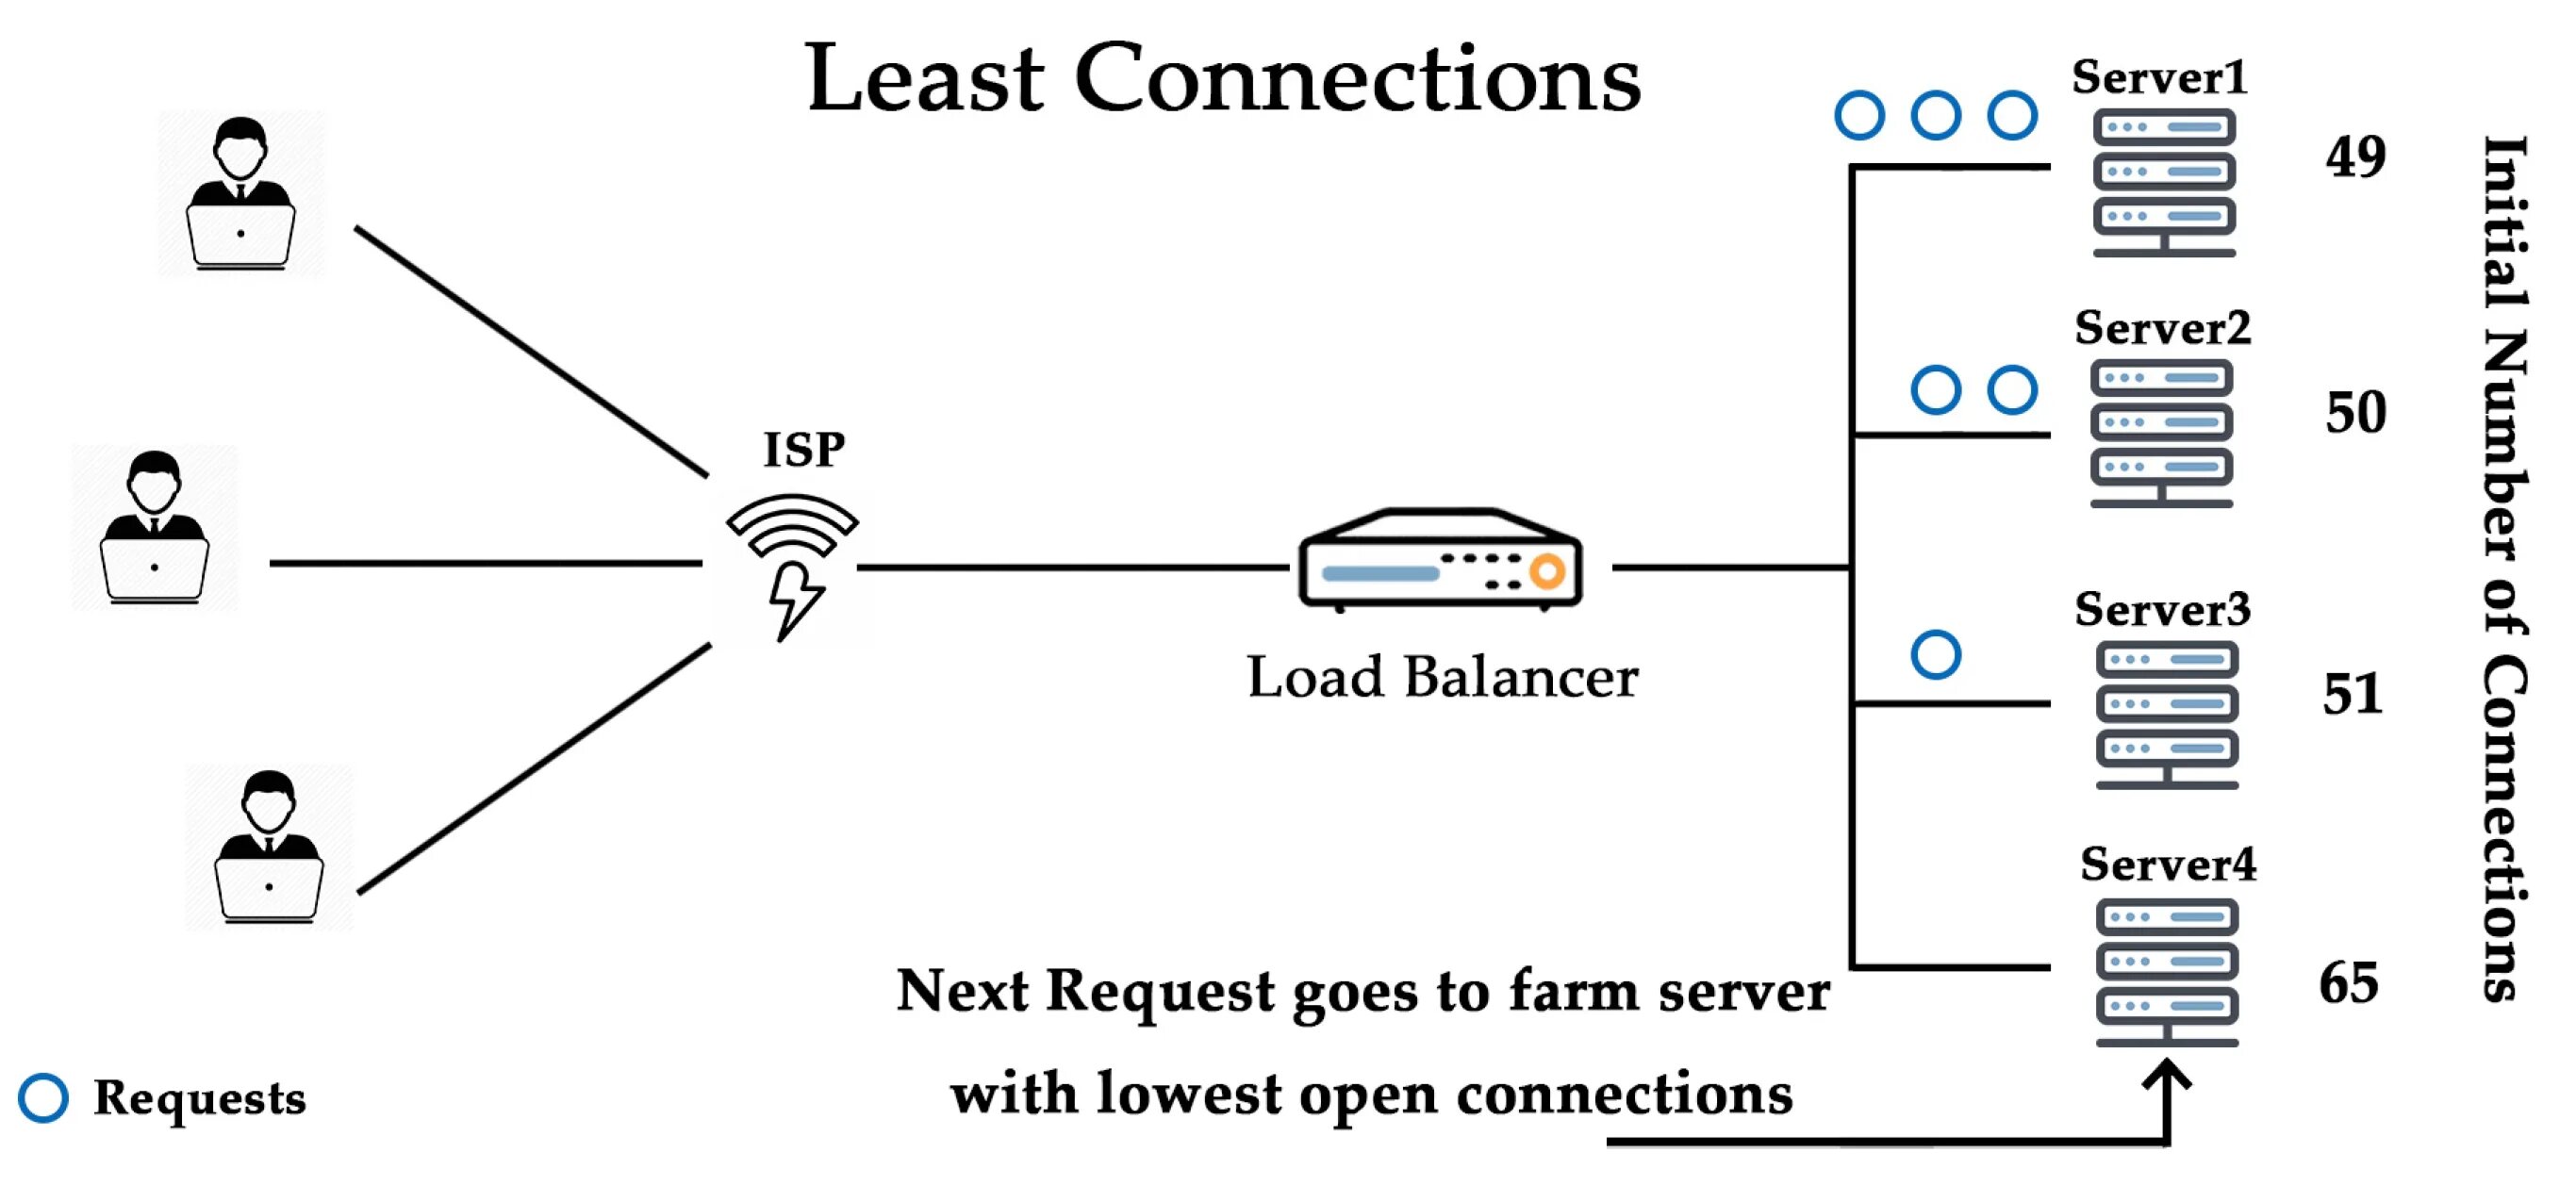 Connected load. Least connections алгоритм. Round-Robin (алгоритм). Алгоритм Round Robin DNS. Least.